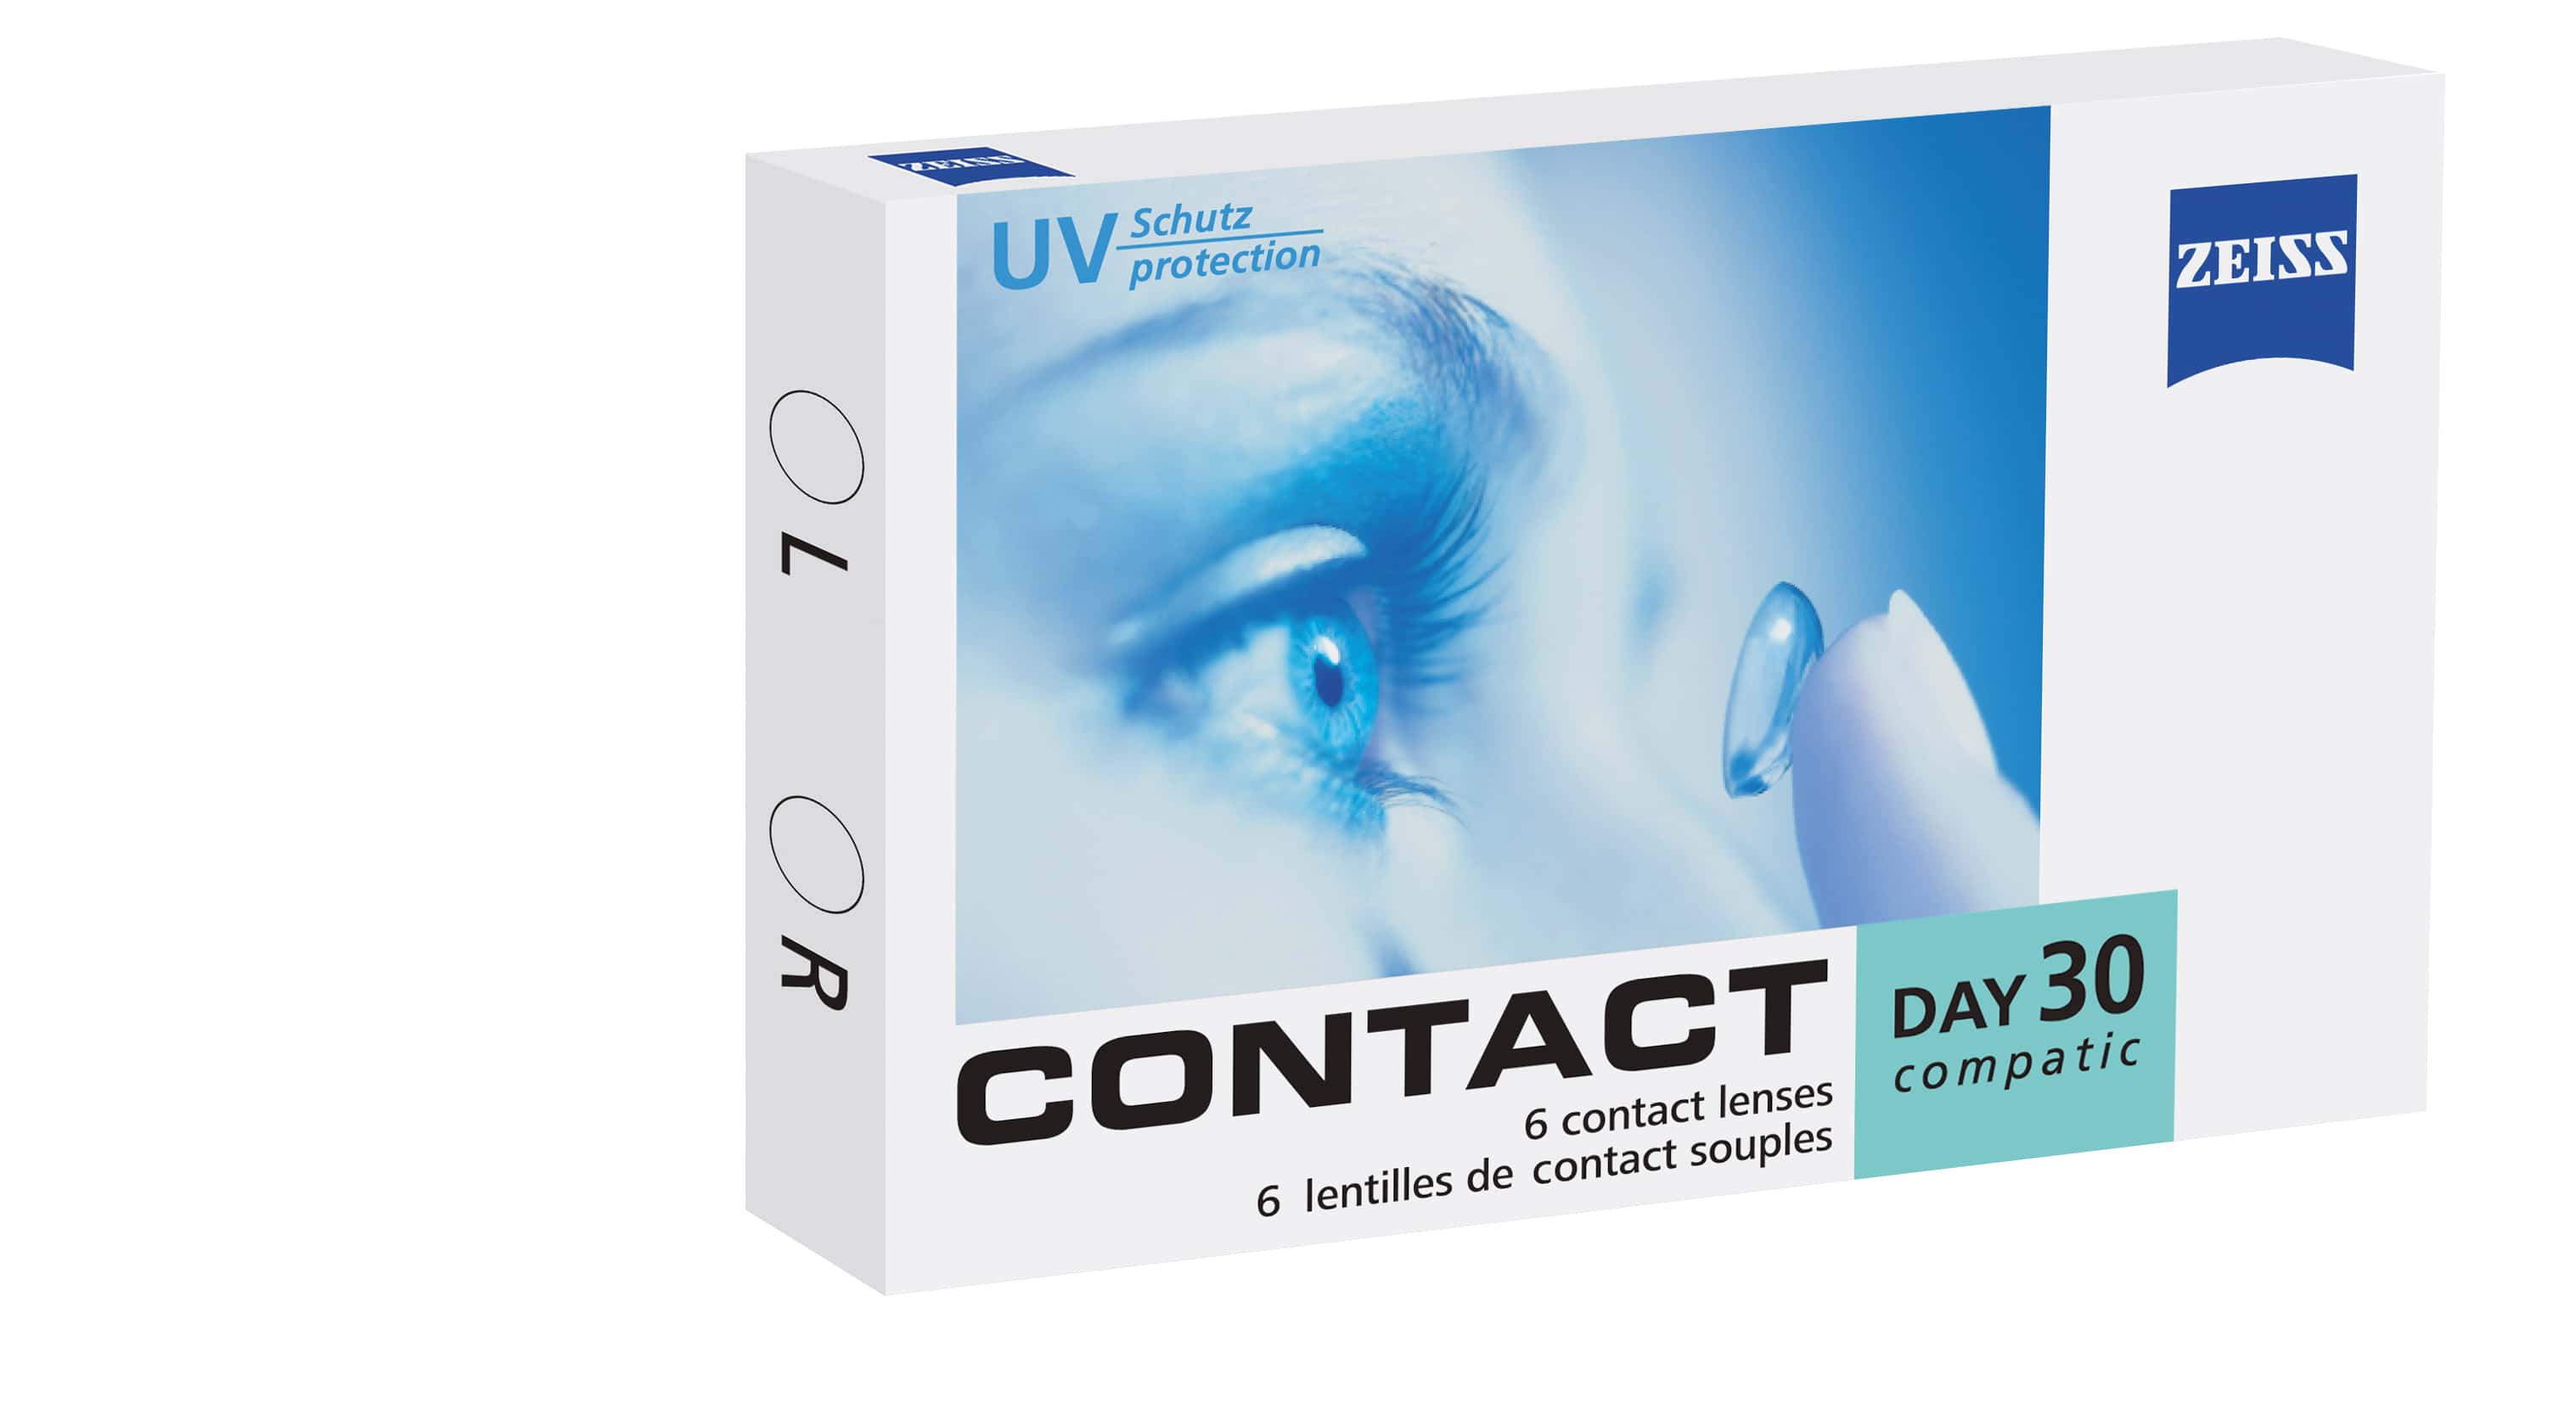 Contact Day 30 Compatic 6L